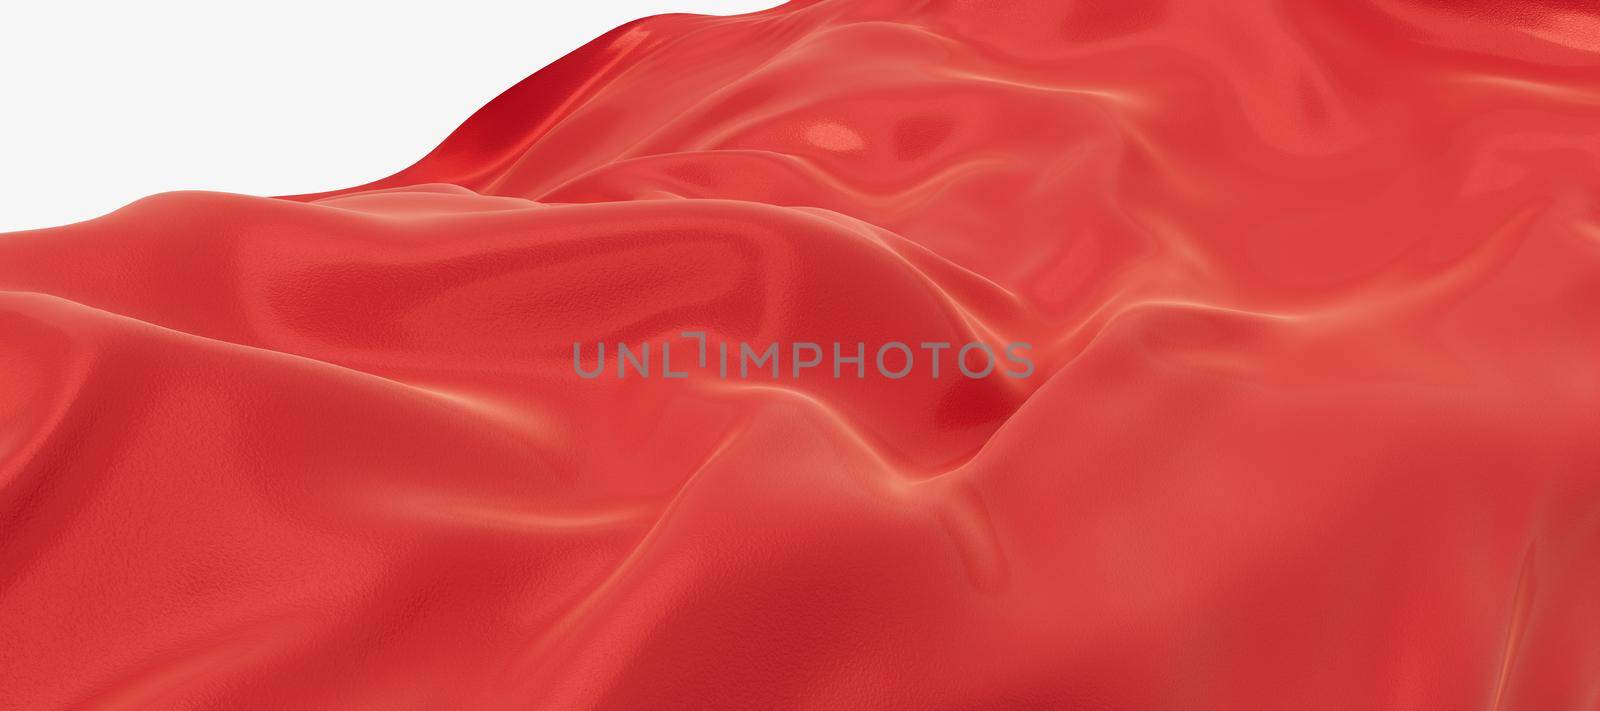 Flowing red wave cloth, 3d rendering. Computer digital drawing.